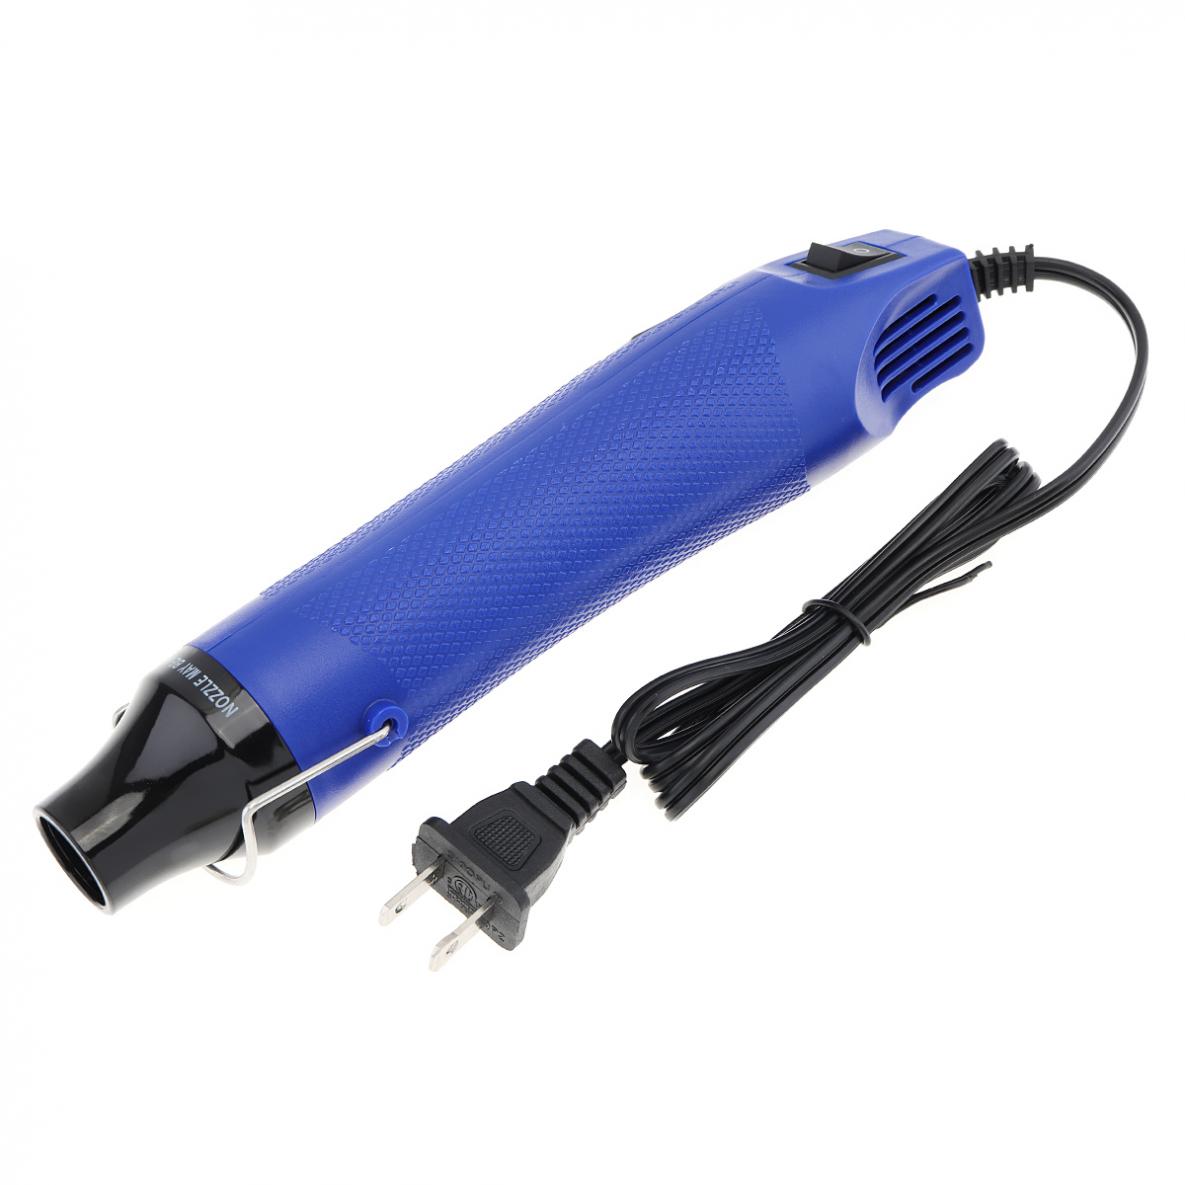 110V / 220V 300W Heat Gun Electric Blower Handmade with Shrink Plastic Surface and EU / US Plug for Heating DIY Accessories